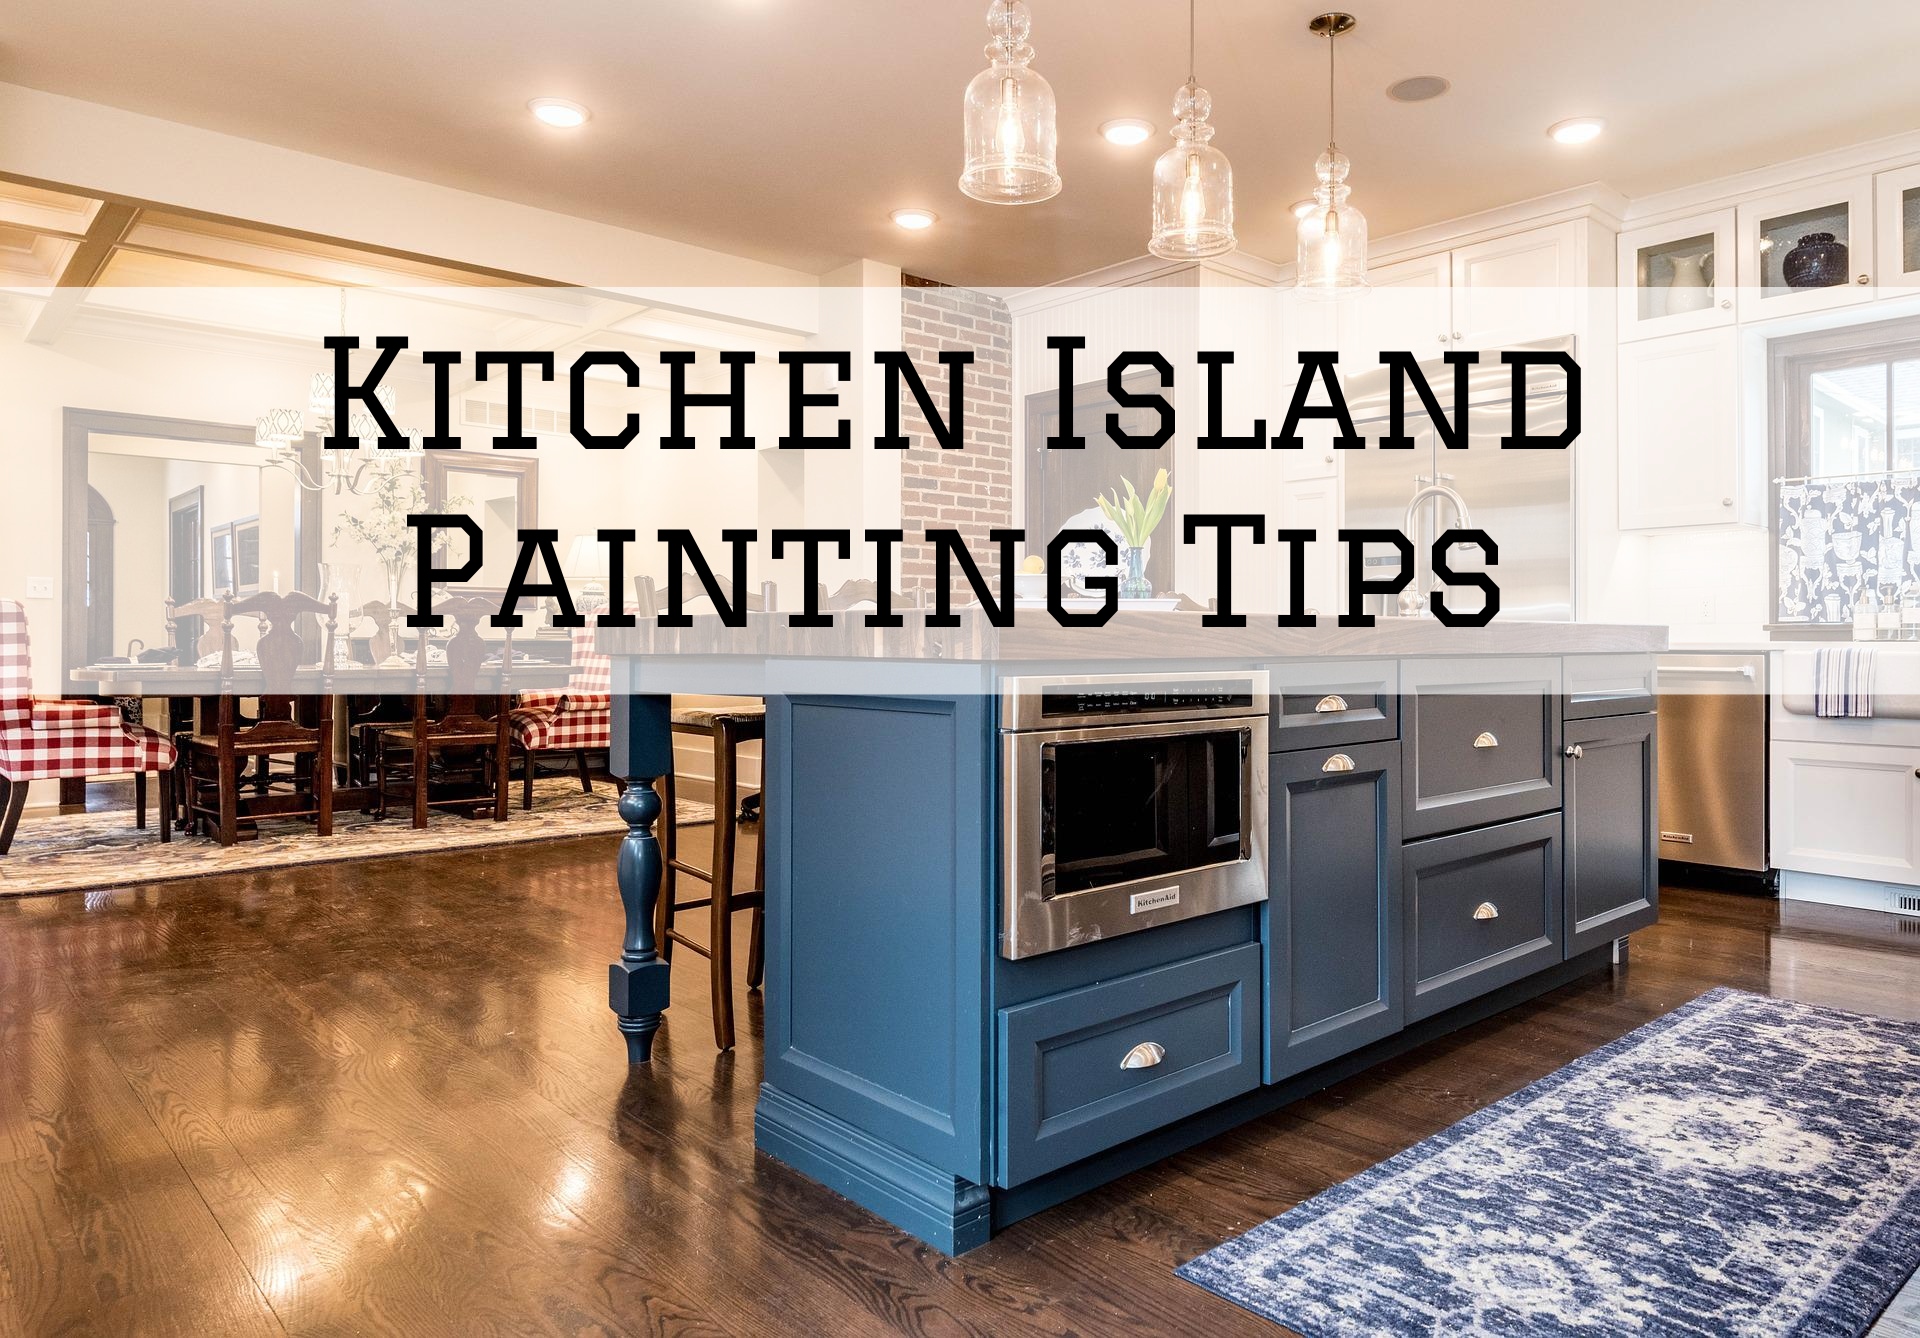 2022-07-26 Left Moon Painting Greenville DE Kitchen Island Painting Tips